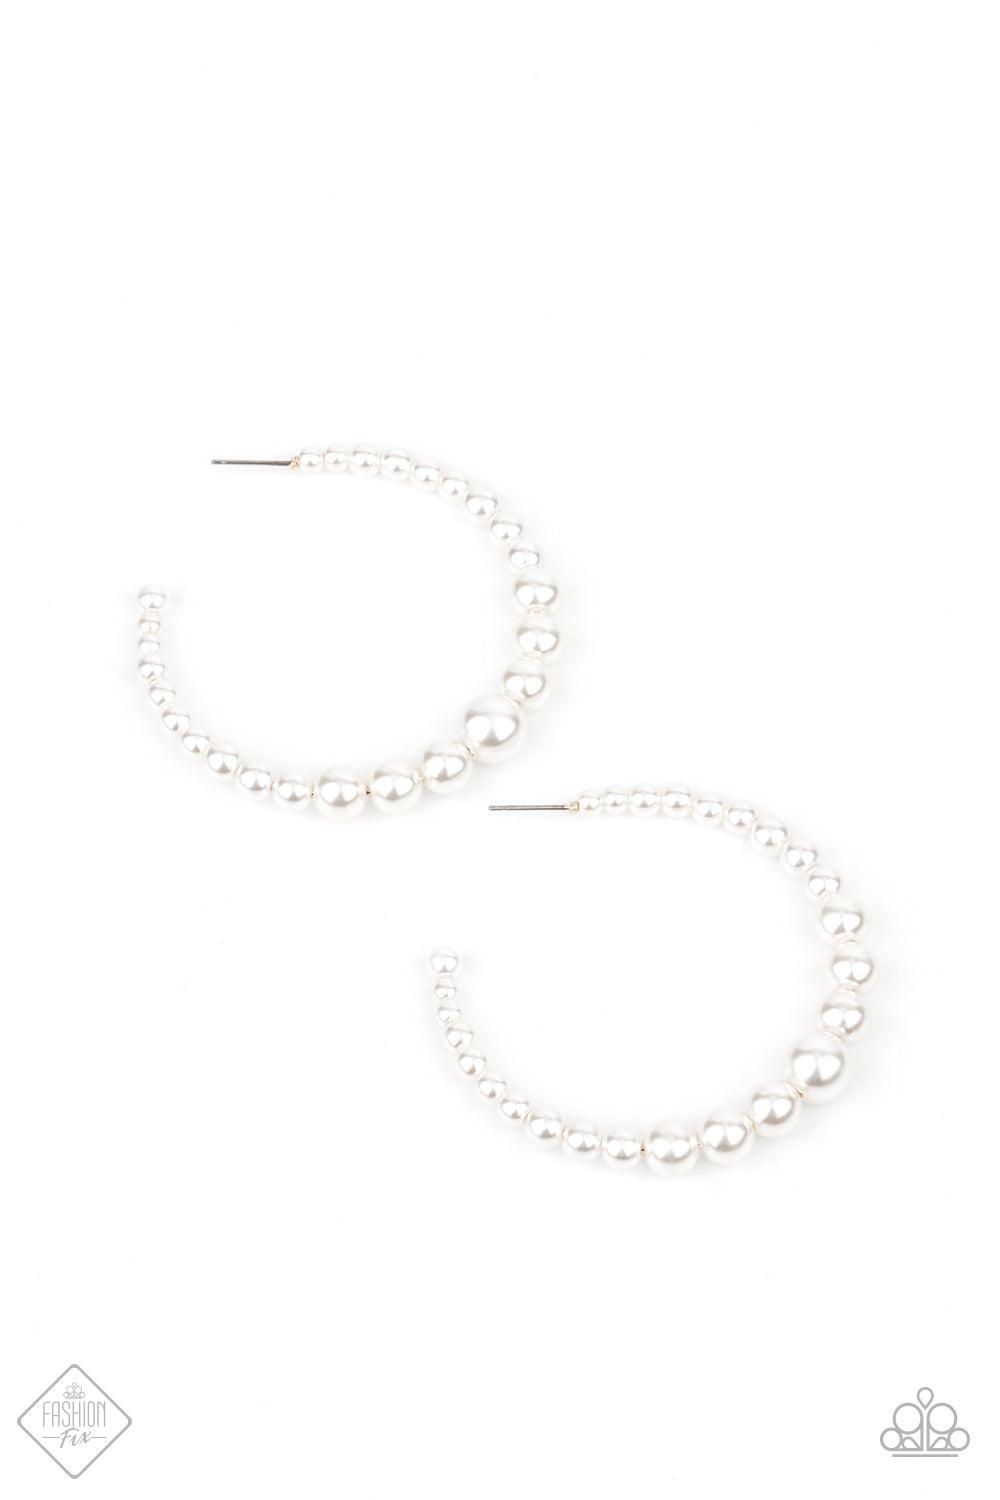 Paparazzi Accessories Glamour Graduate - White Gradually increasing in size at the center, a classy row of white pearls are threaded along an oversized hoop for a posh finish. Earring attaches to a standard post fitting. Hoop measures approximately 2 1/4"